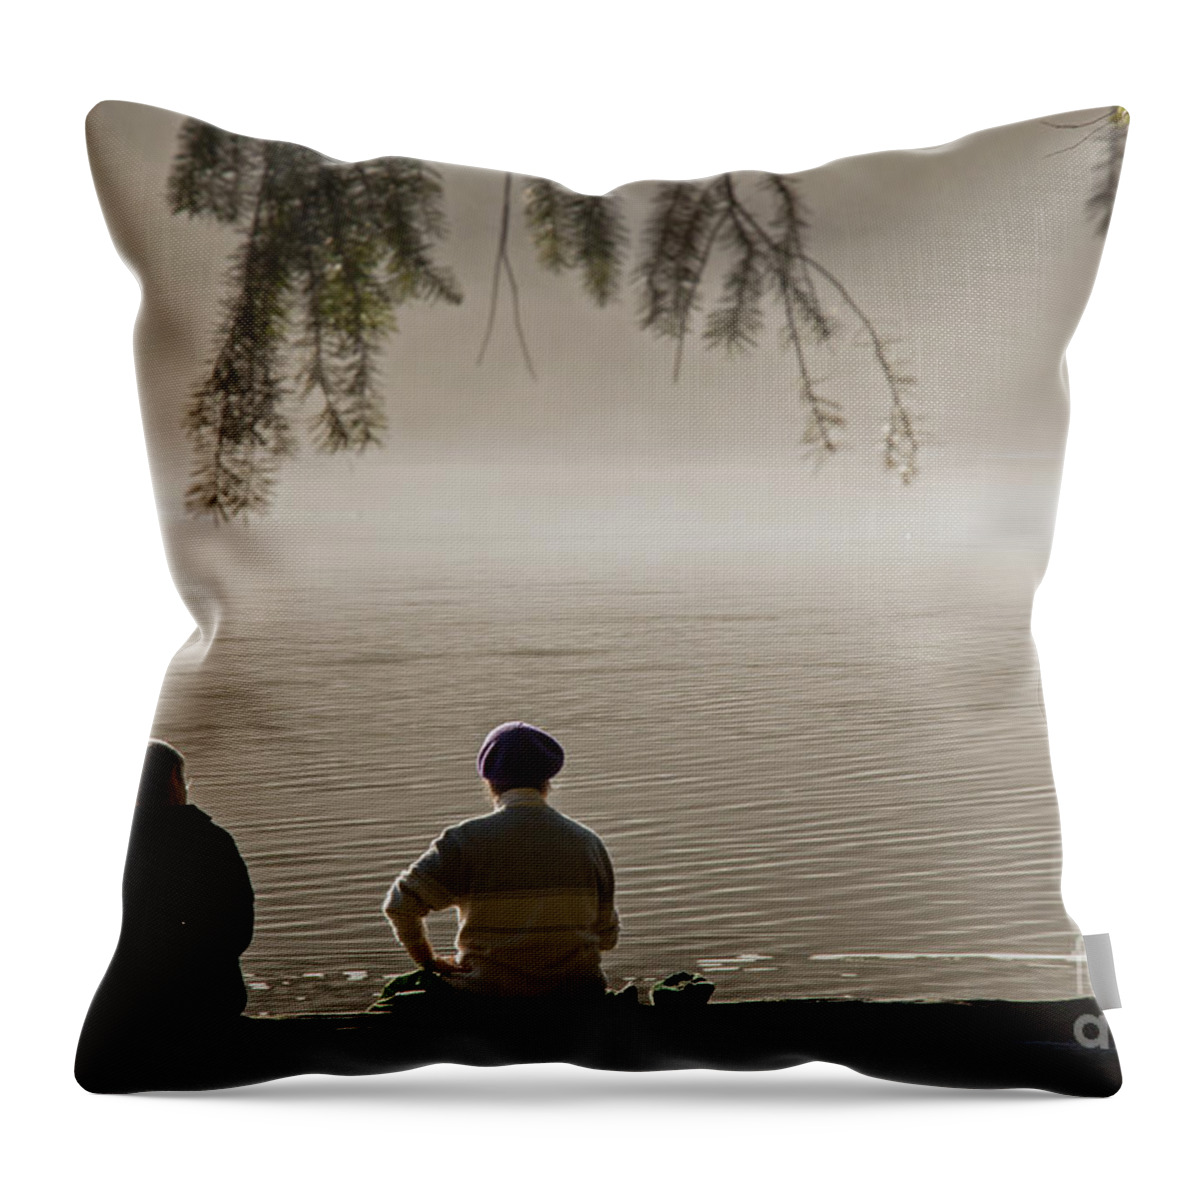 Morning Throw Pillow featuring the photograph Quiet Time by Inge Riis McDonald